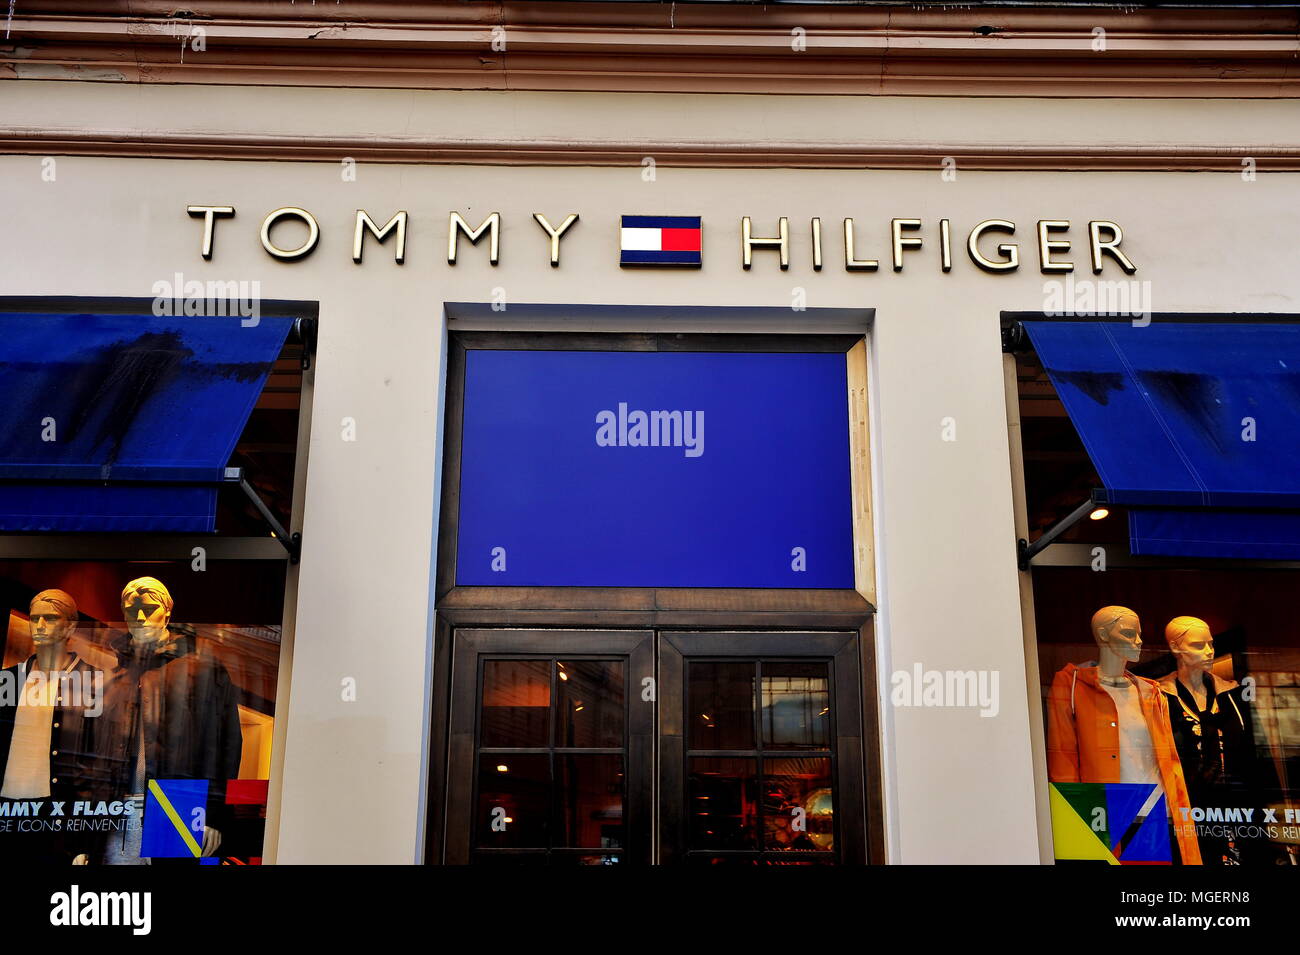 MOSCOW, RUSSIA - FEBRUARY 13: Facade of Tommy Hilfiger store in Moscow on  February 13, 2018 Stock Photo - Alamy